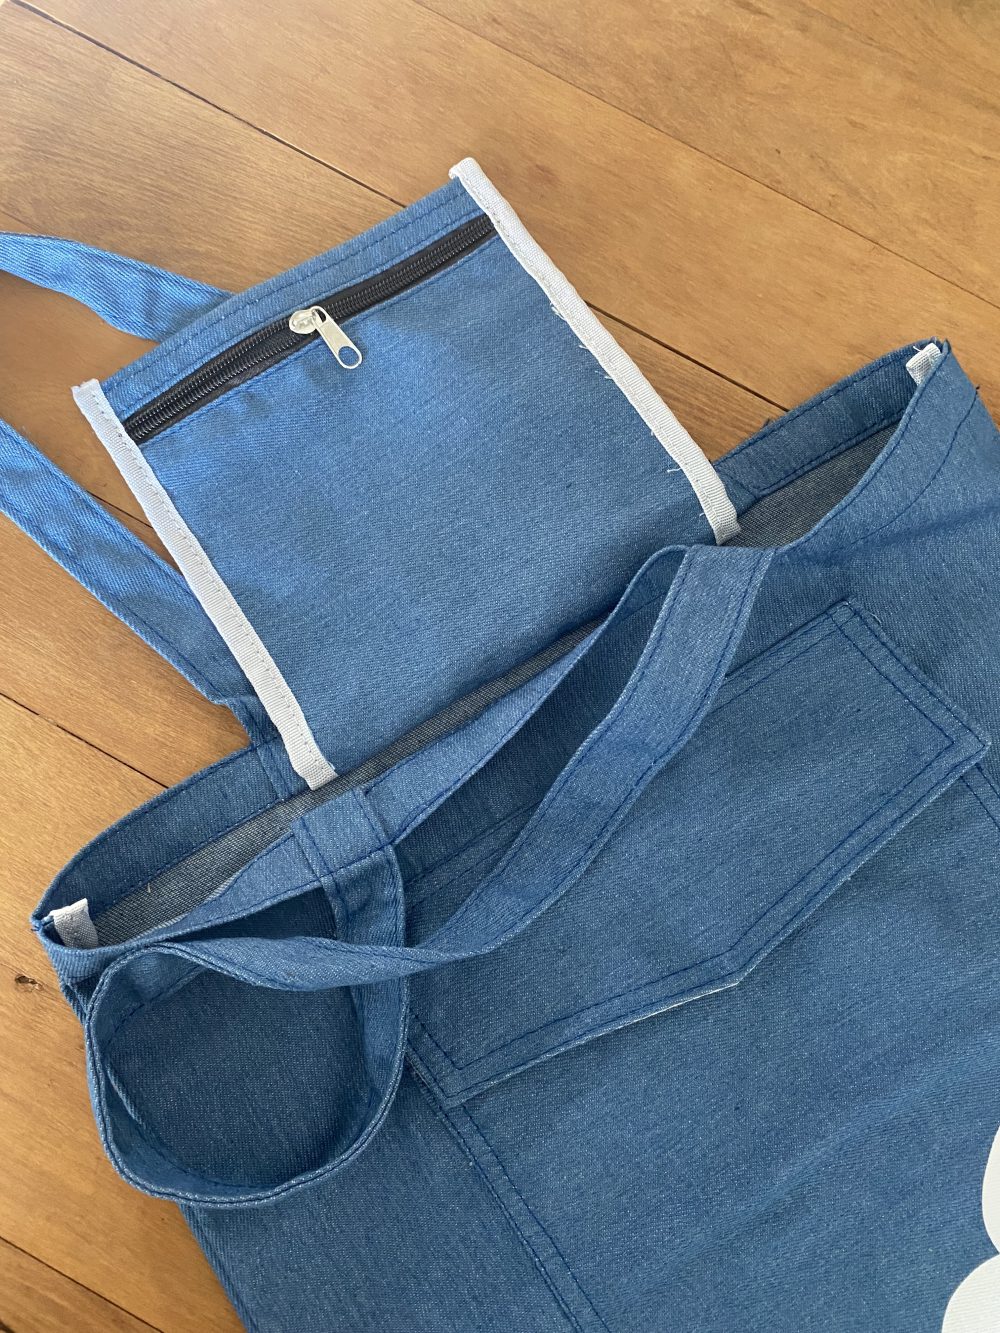 The Woven Denim Tote Bag "Knitting is in the hands of Everyone"